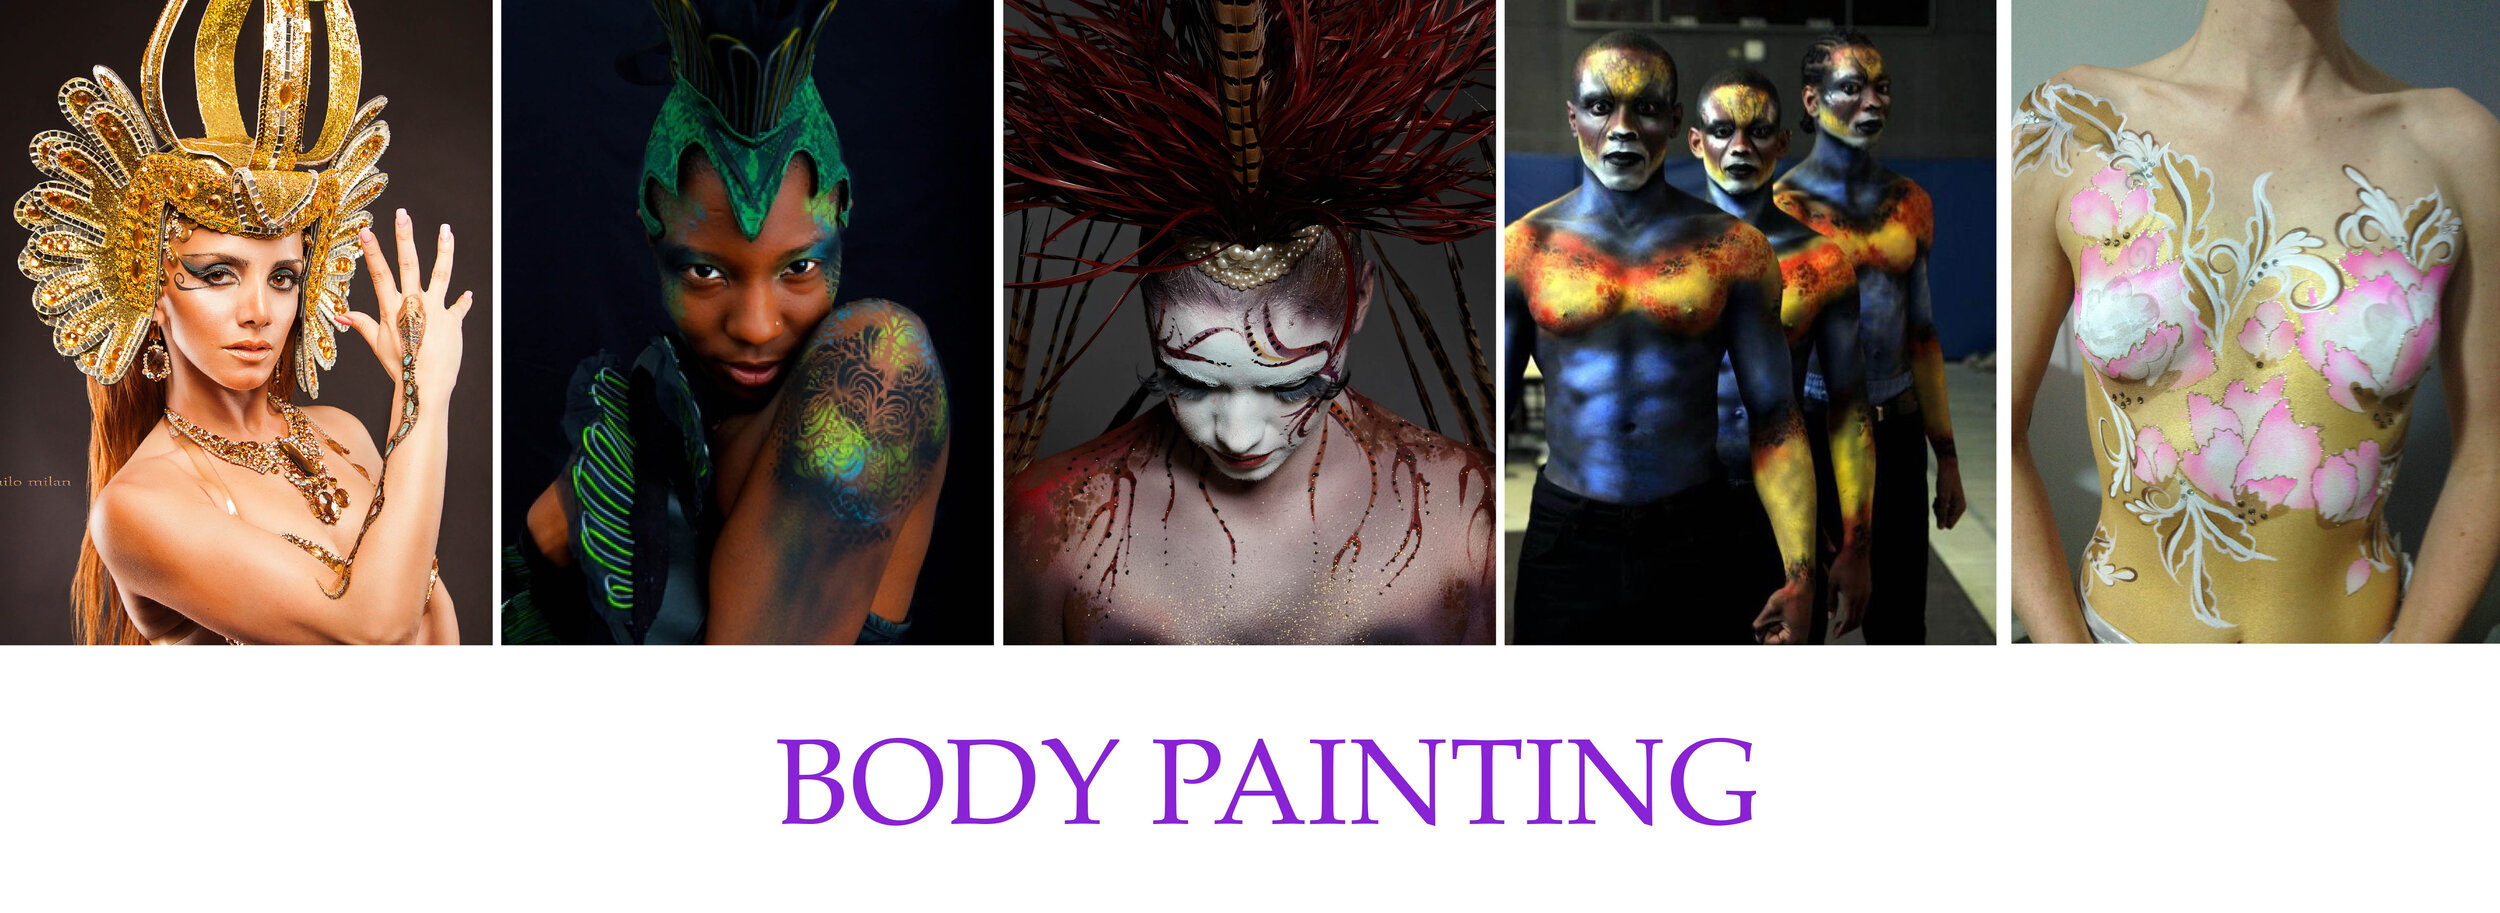 Body Painting We Adorn You.jpg